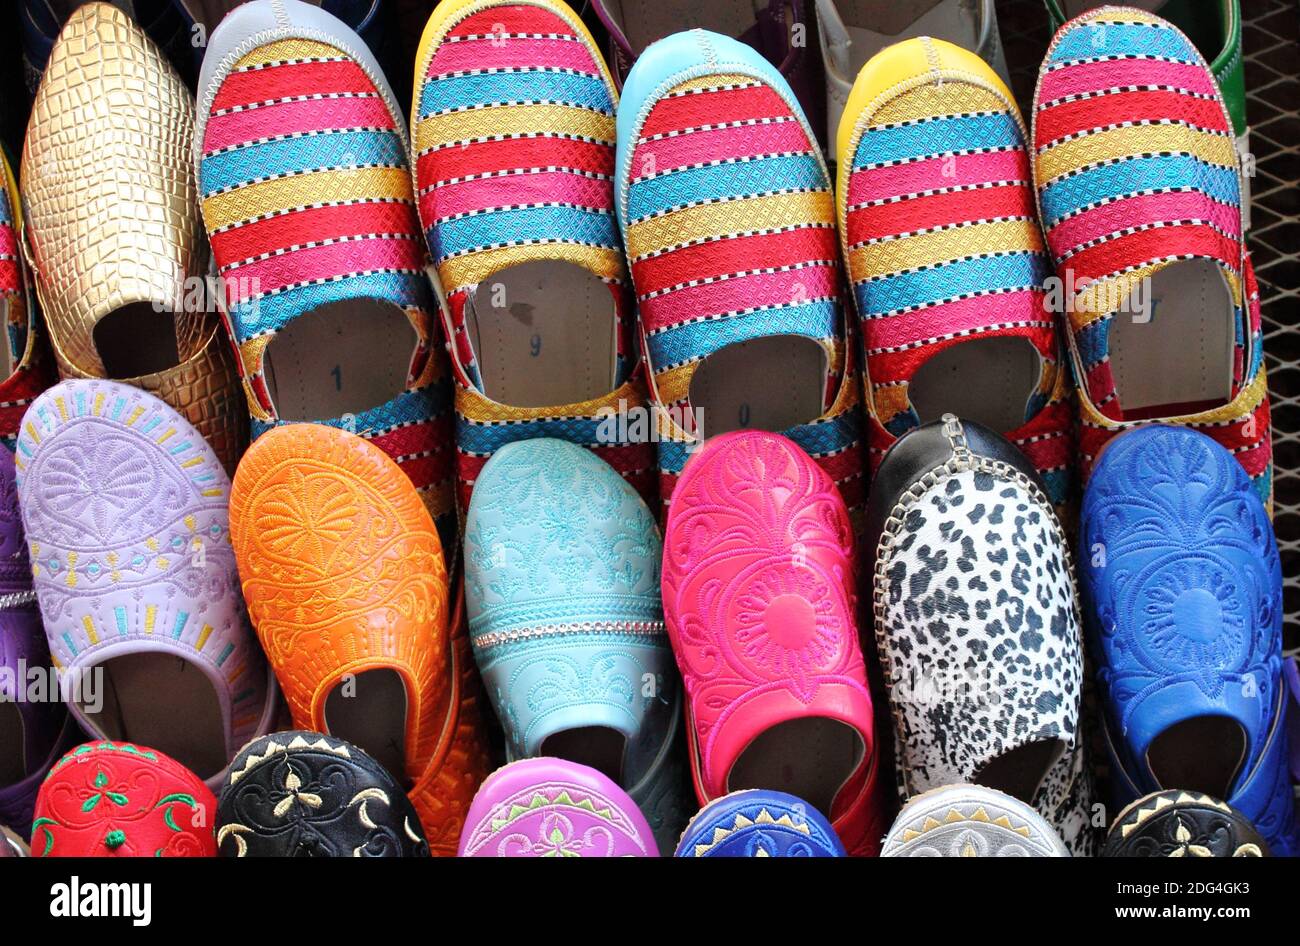 Leather moroccan slippers for sale in a market stall Stock Photo